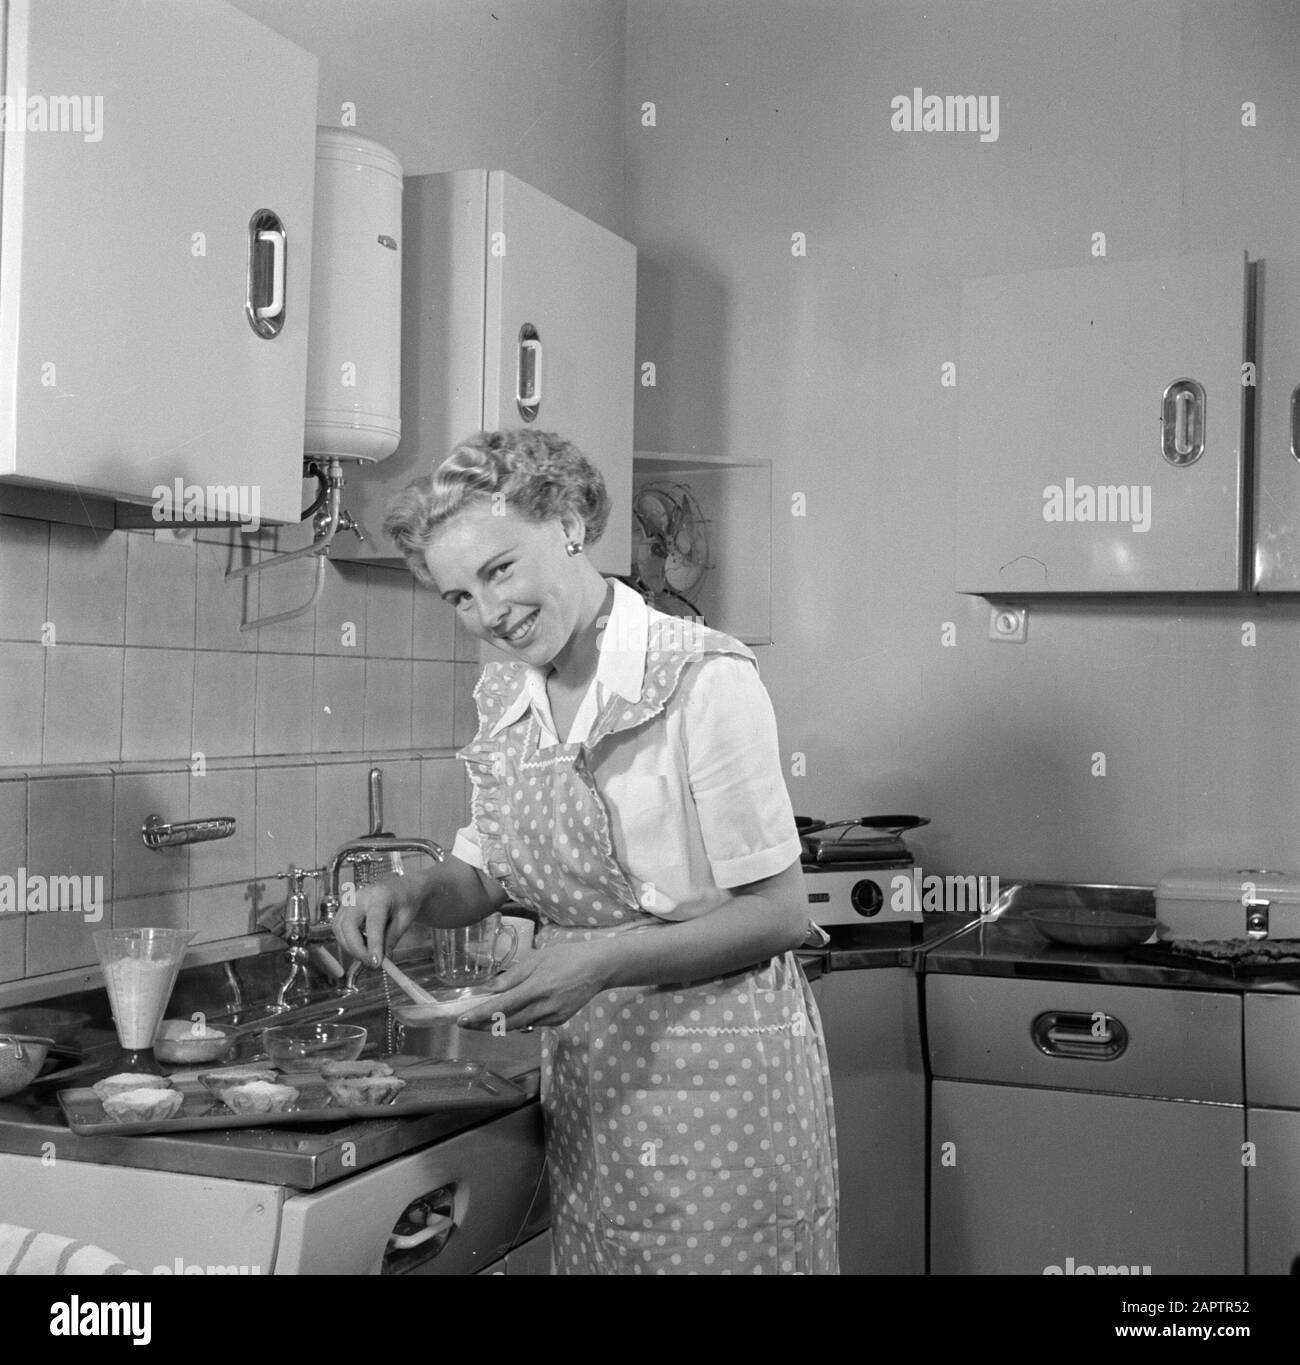 https://c8.alamy.com/comp/2APTR52/advertising-photography-housewife-in-model-kitchen-making-a-cake-annotation-photo-made-for-the-publication-we-bakken-itselves-written-by-r-lotgering-hillebrand-and-published-by-publisher-van-holkema-warendorf-date-1-june-1953-keywords-kitchens-food-preparation-women-2APTR52.jpg